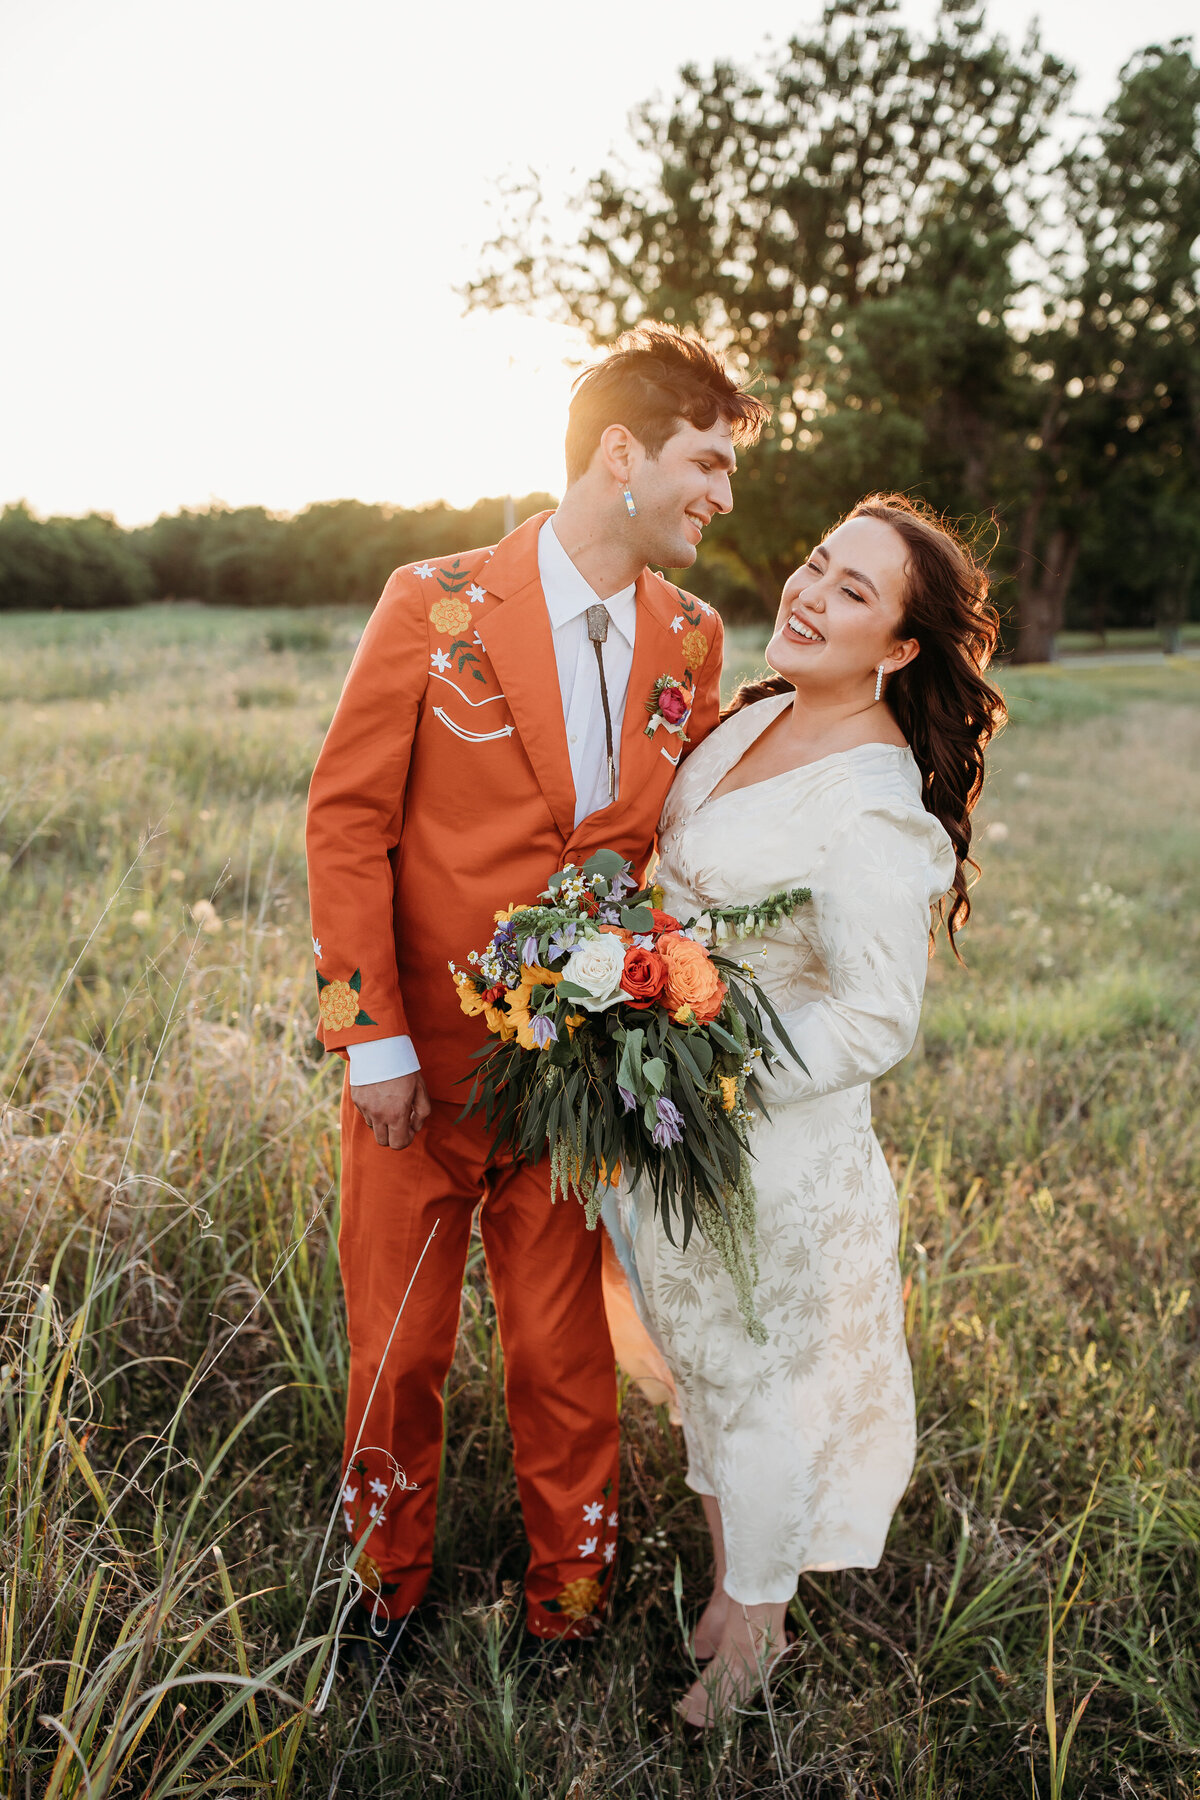 Couple in a sunset field, with the partner in a vibrant orange suit and the other in a white dress, both smiling lovingly